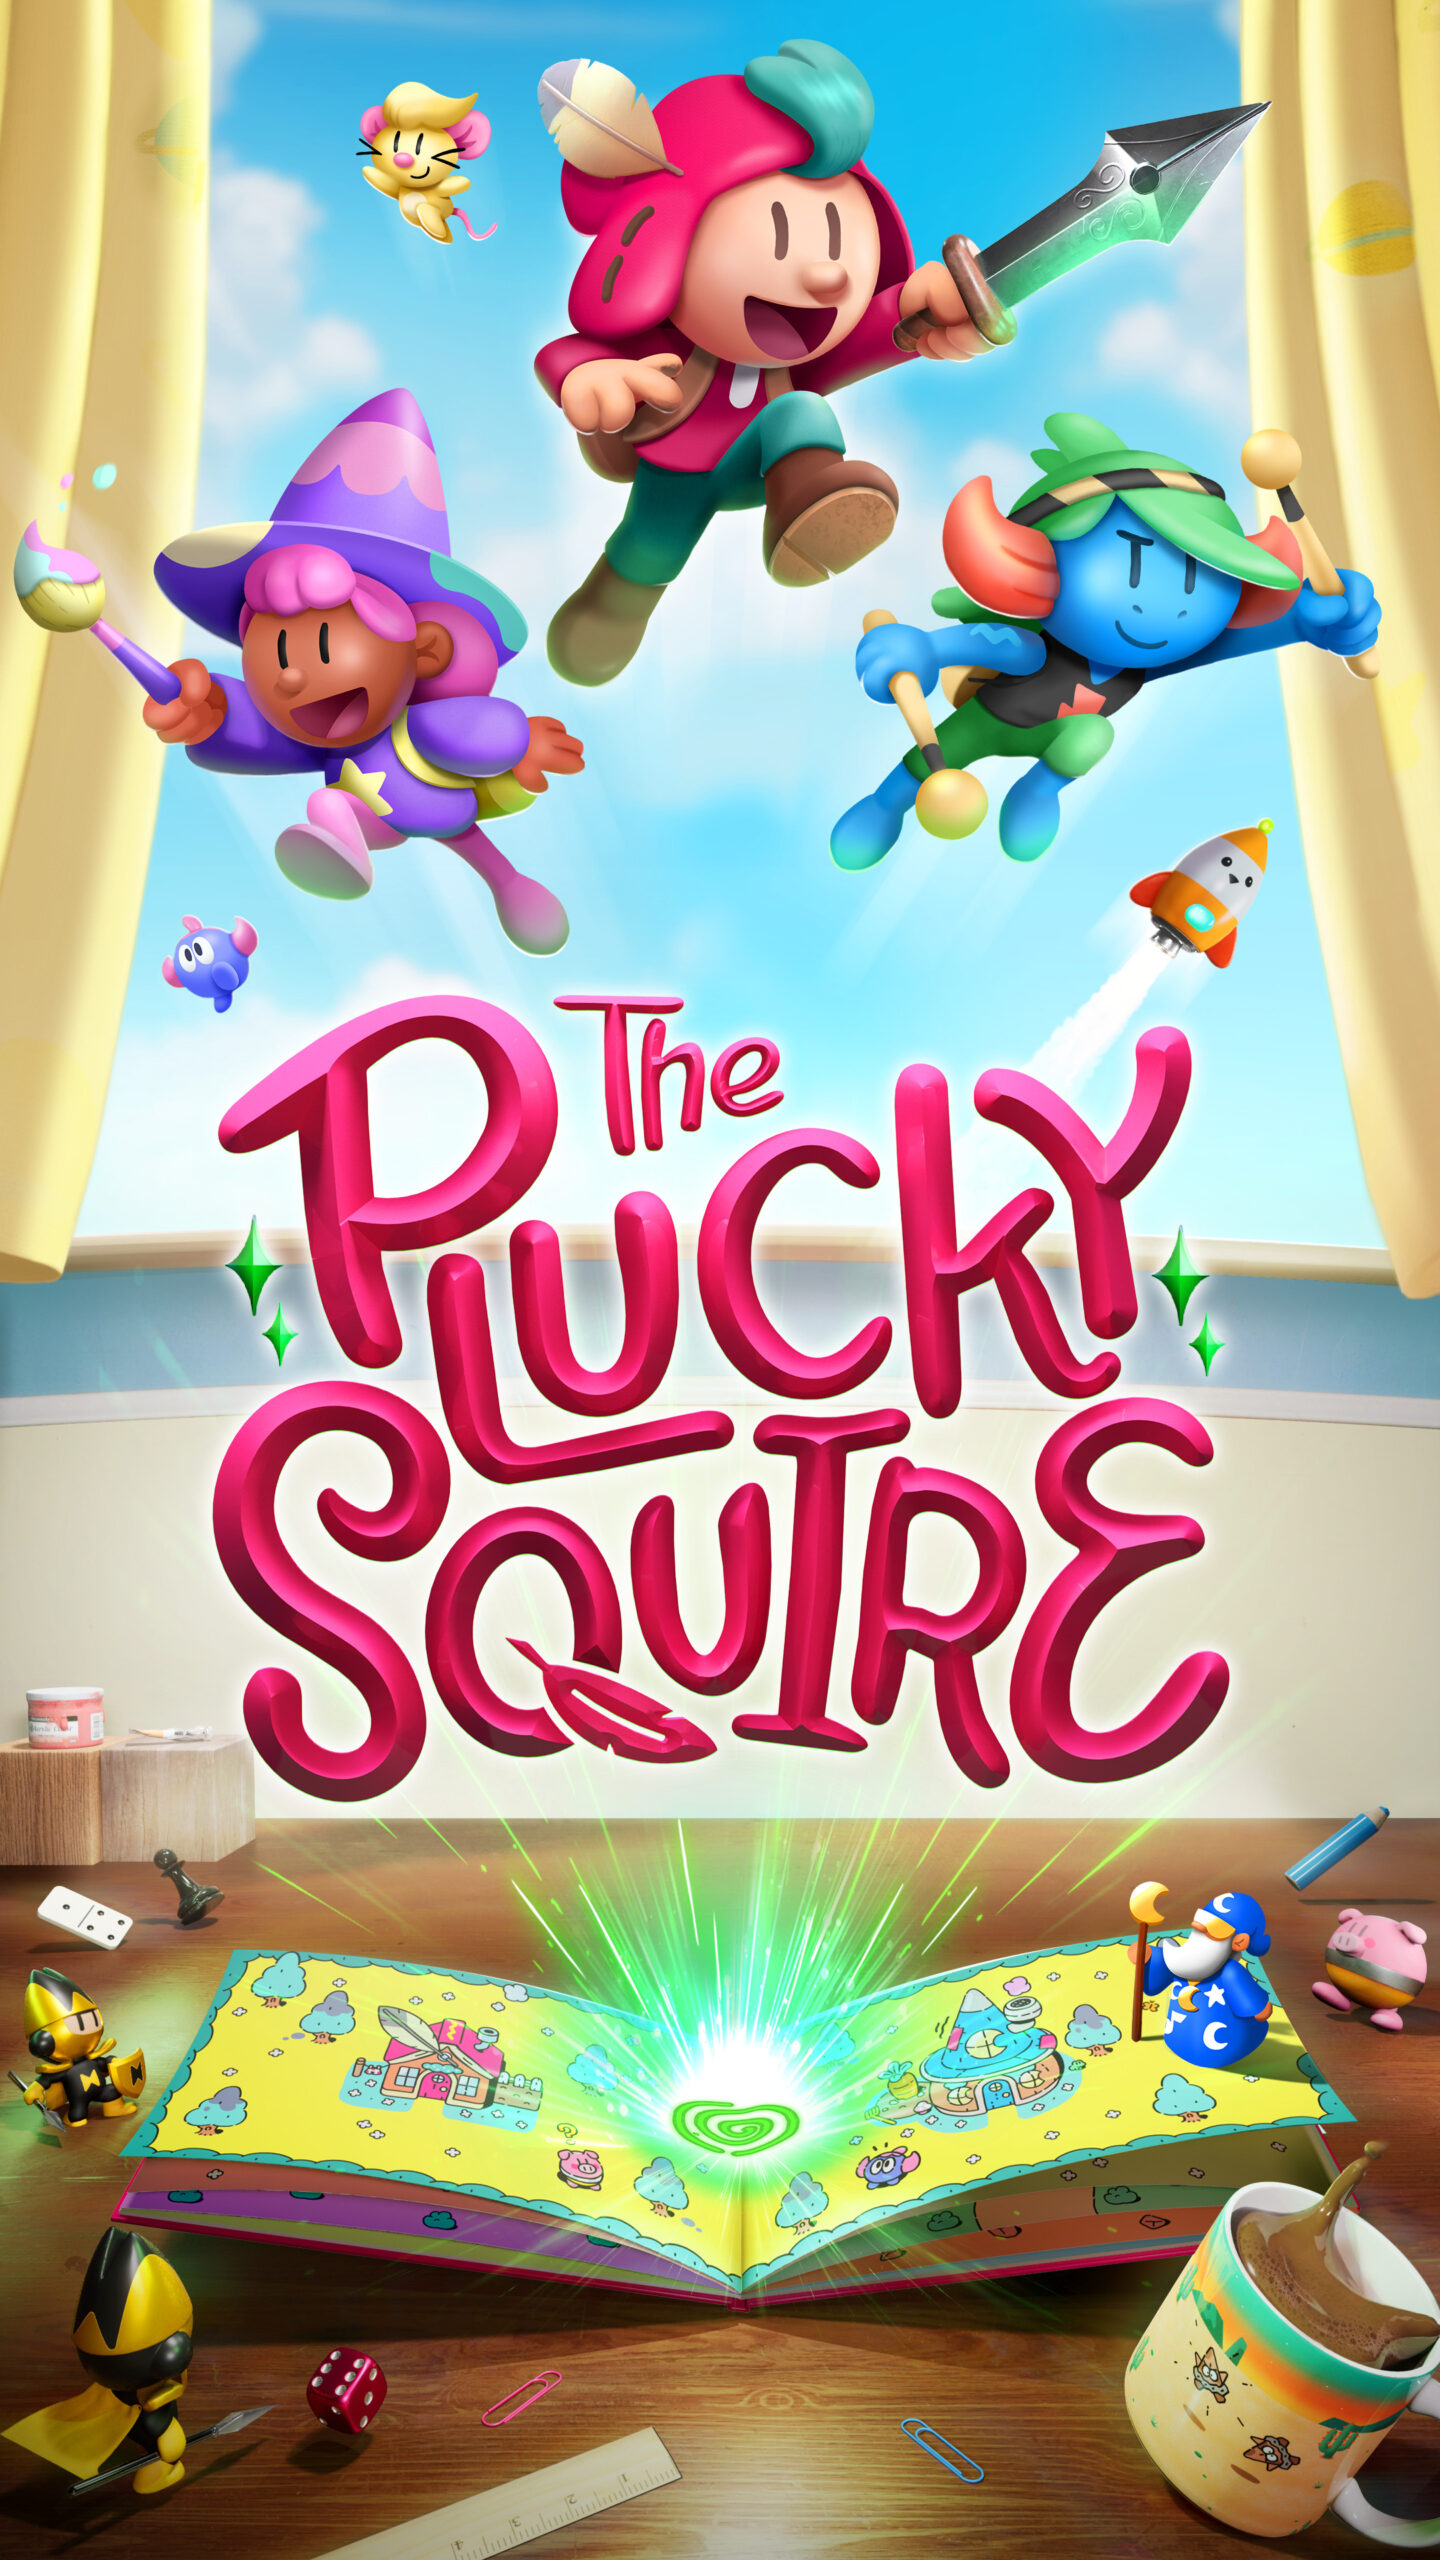 plucky squire release date